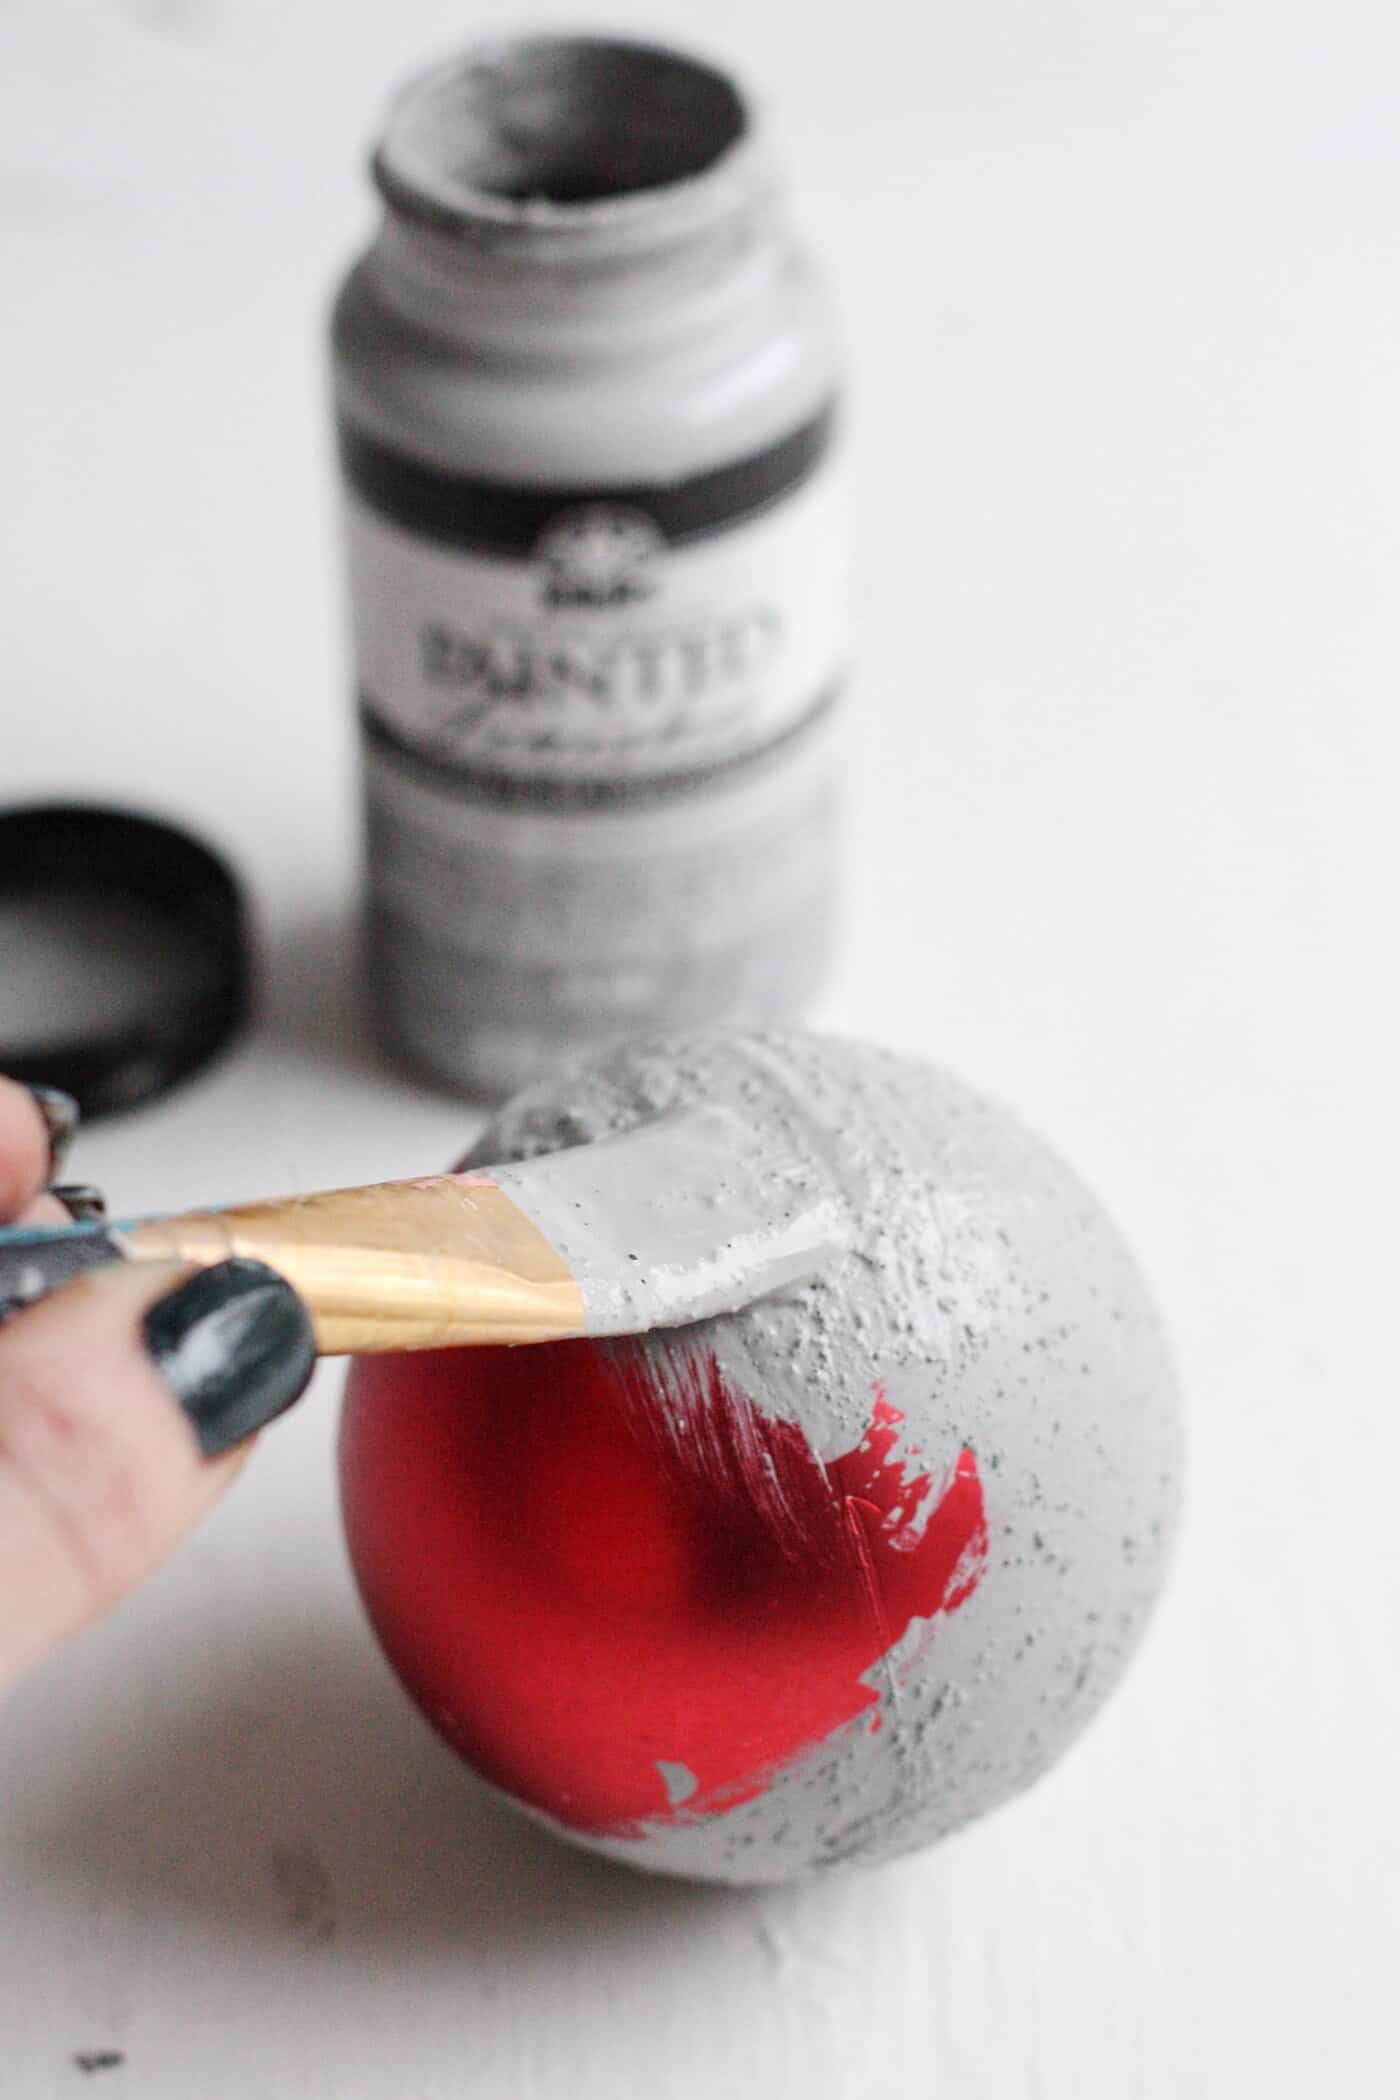 Painting a red Christmas ball ornament using concrete finish and a paintbrush